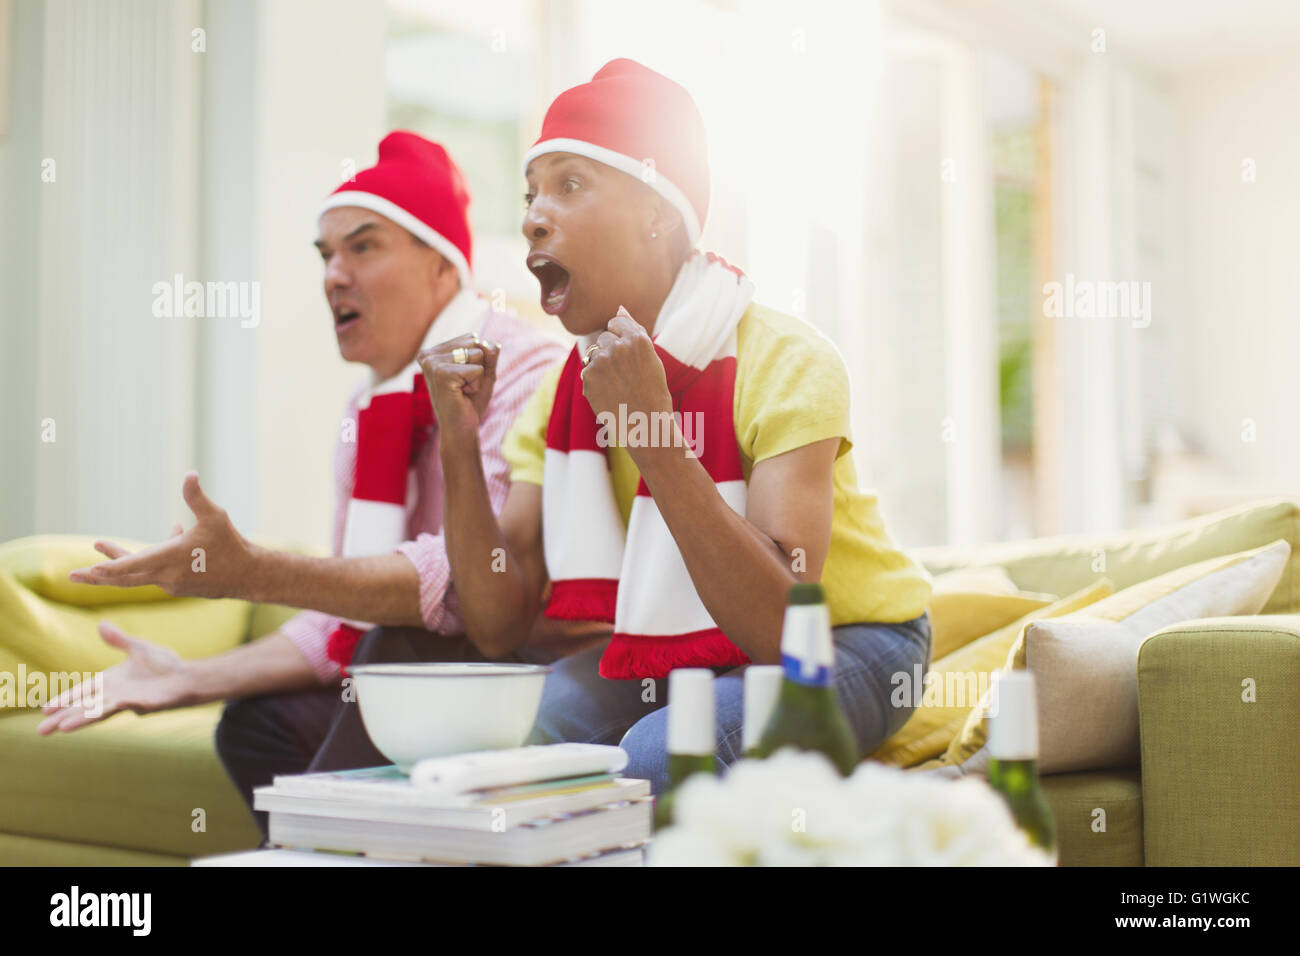 Cheering mature couple wearing matching hats and watching TV sports event in living room Stock Photo